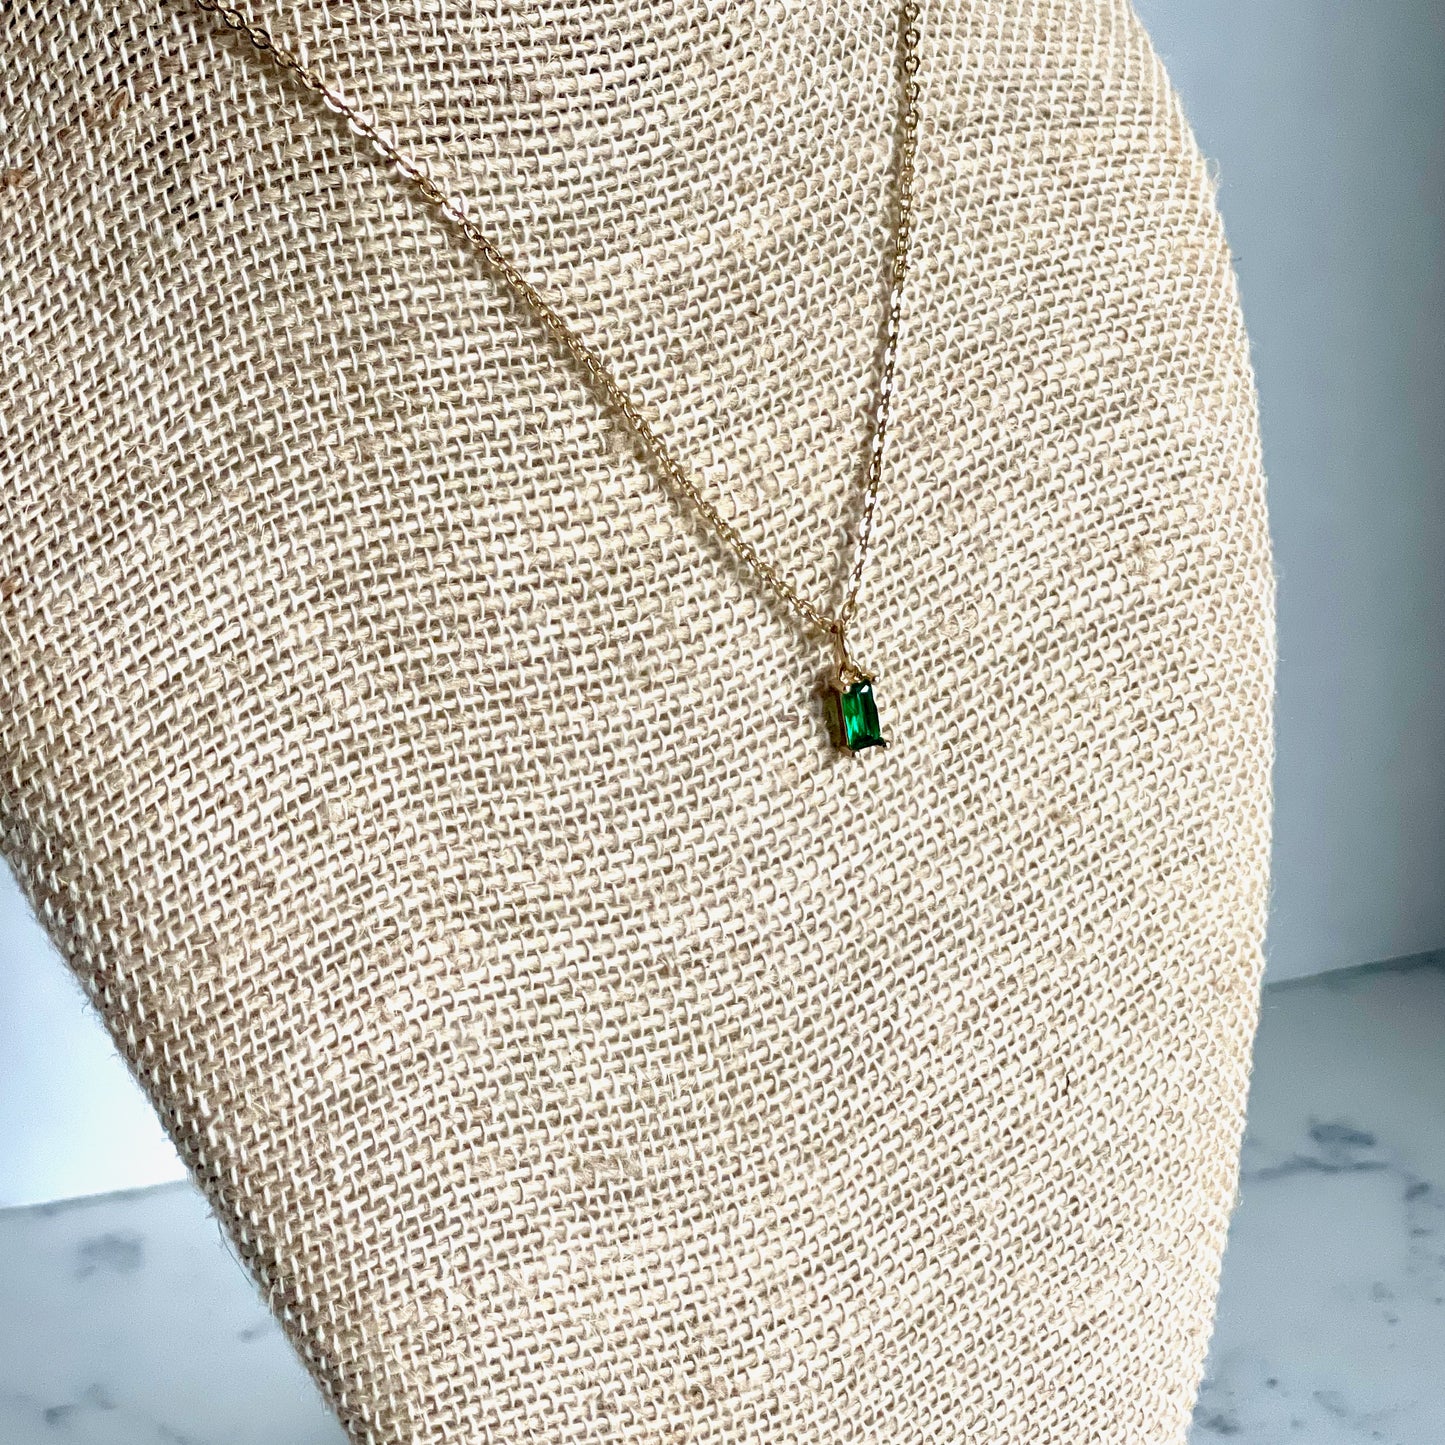 Green Emerald Crystal Charm Necklace. Glass Vial Display